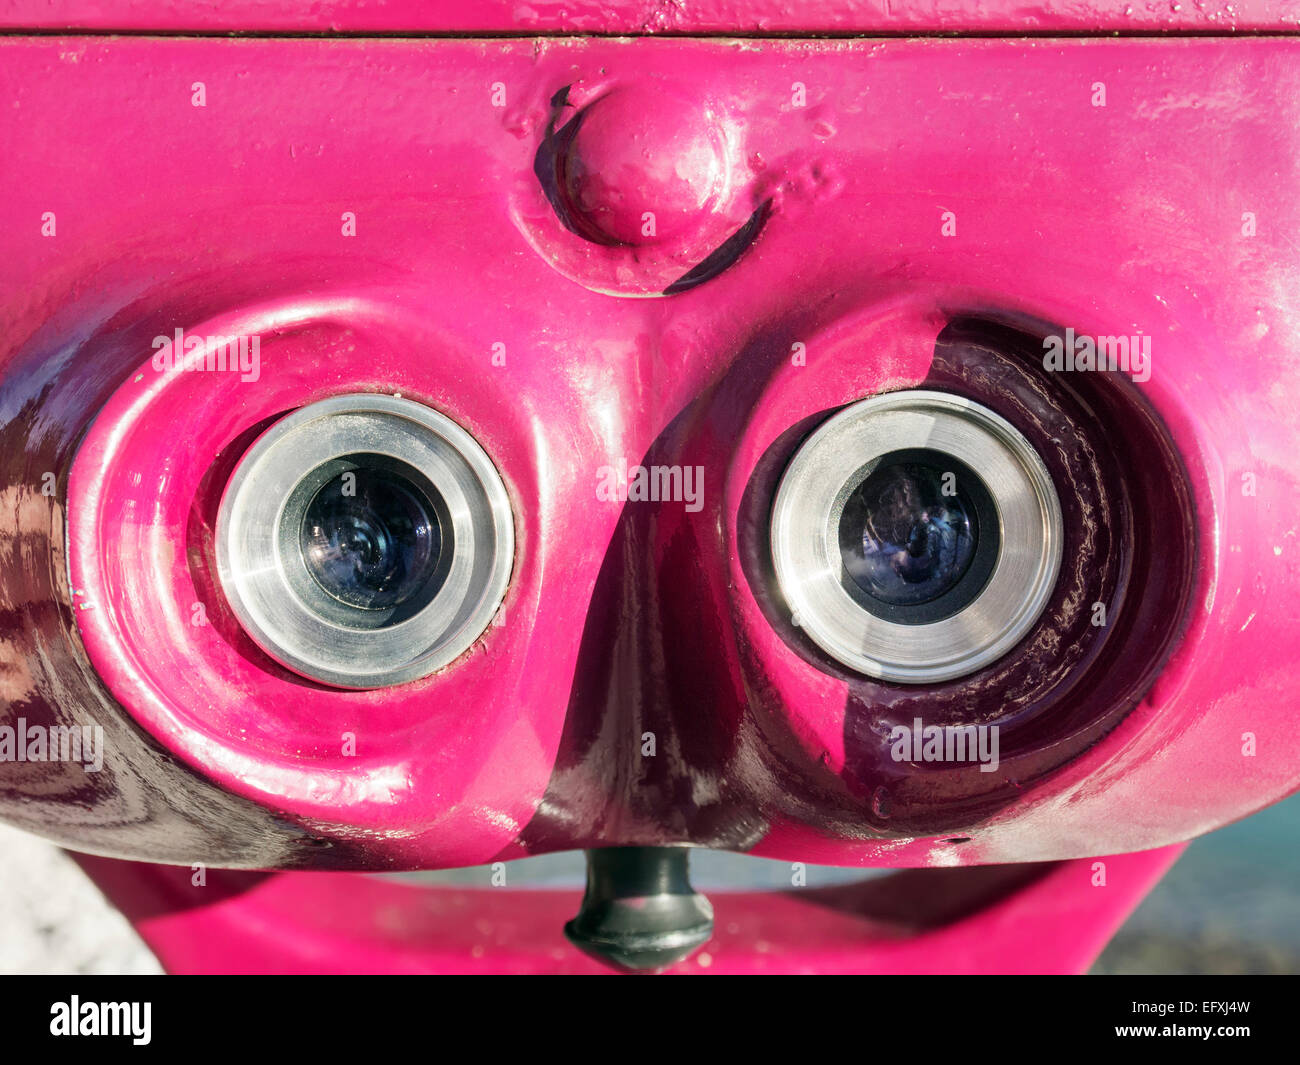 Closup of the ocular of a pink telescope Stock Photo